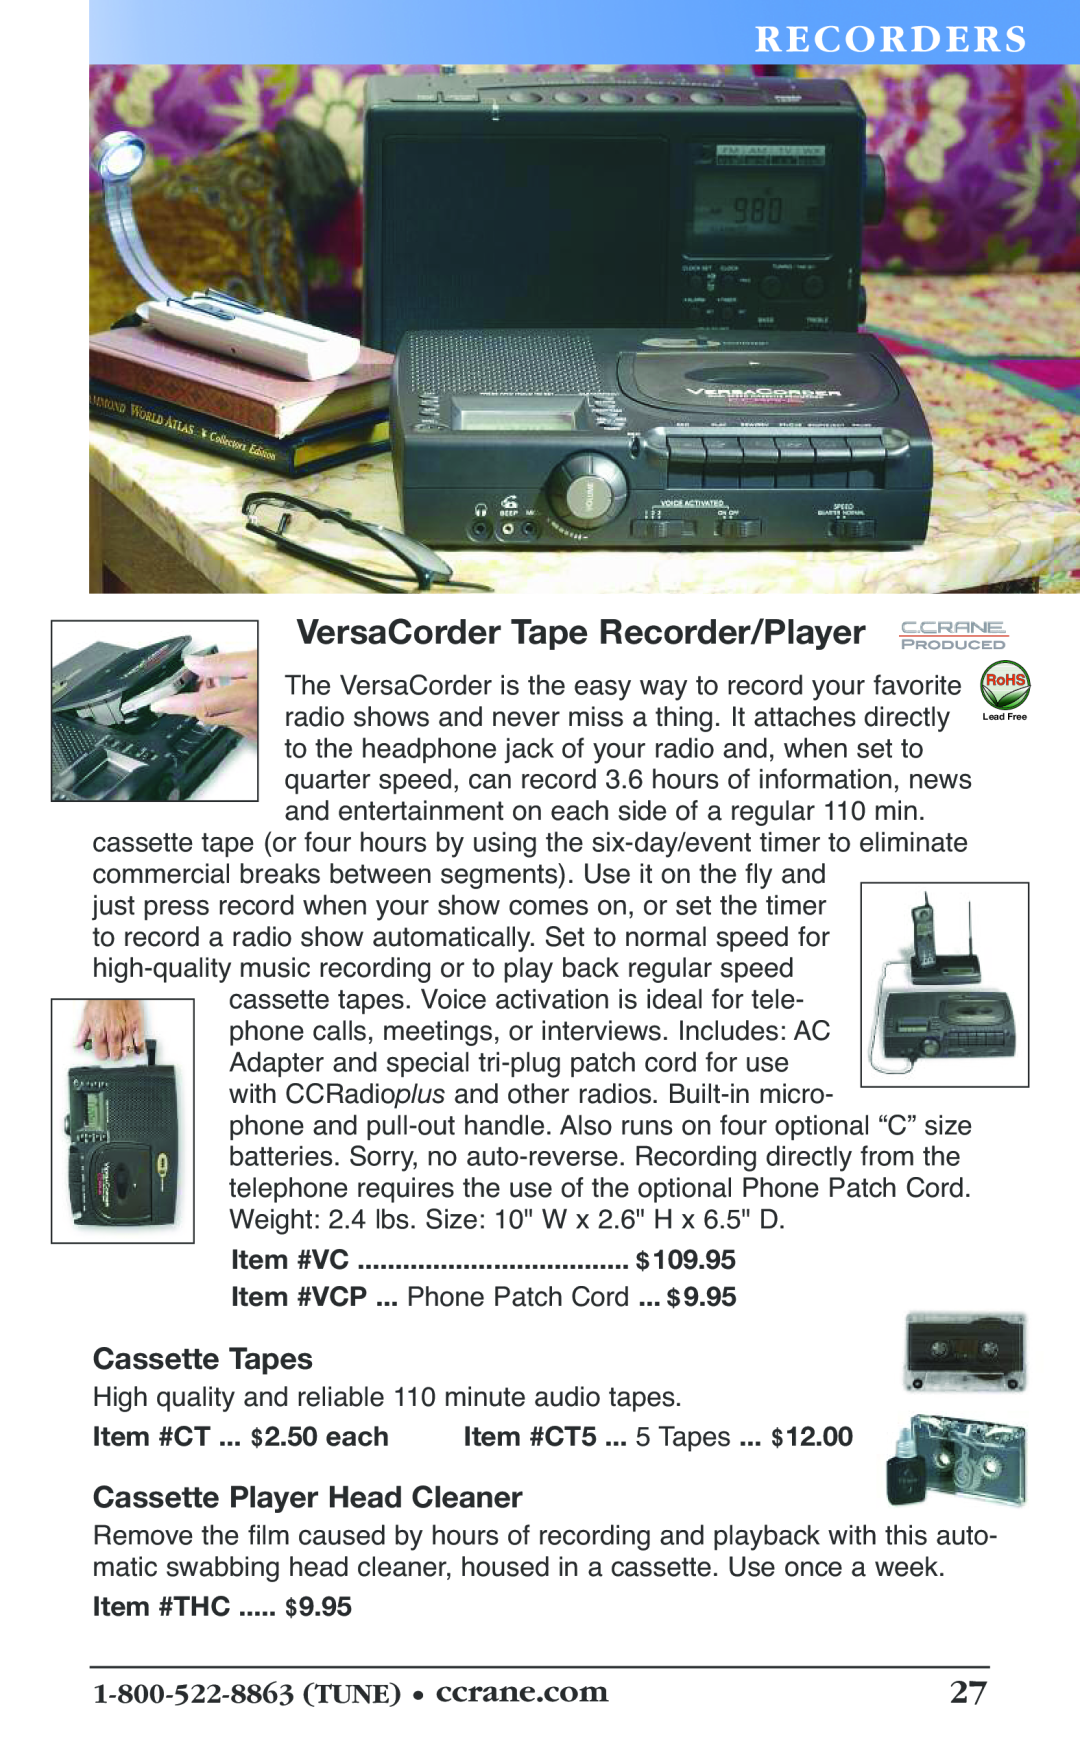 C. Crane 19f Rec Or De Rs, VersaCorder Tape Recorder/Player, Cassette Tapes, Item #VCP ... Phone Patch Cord ... $, $9.95 